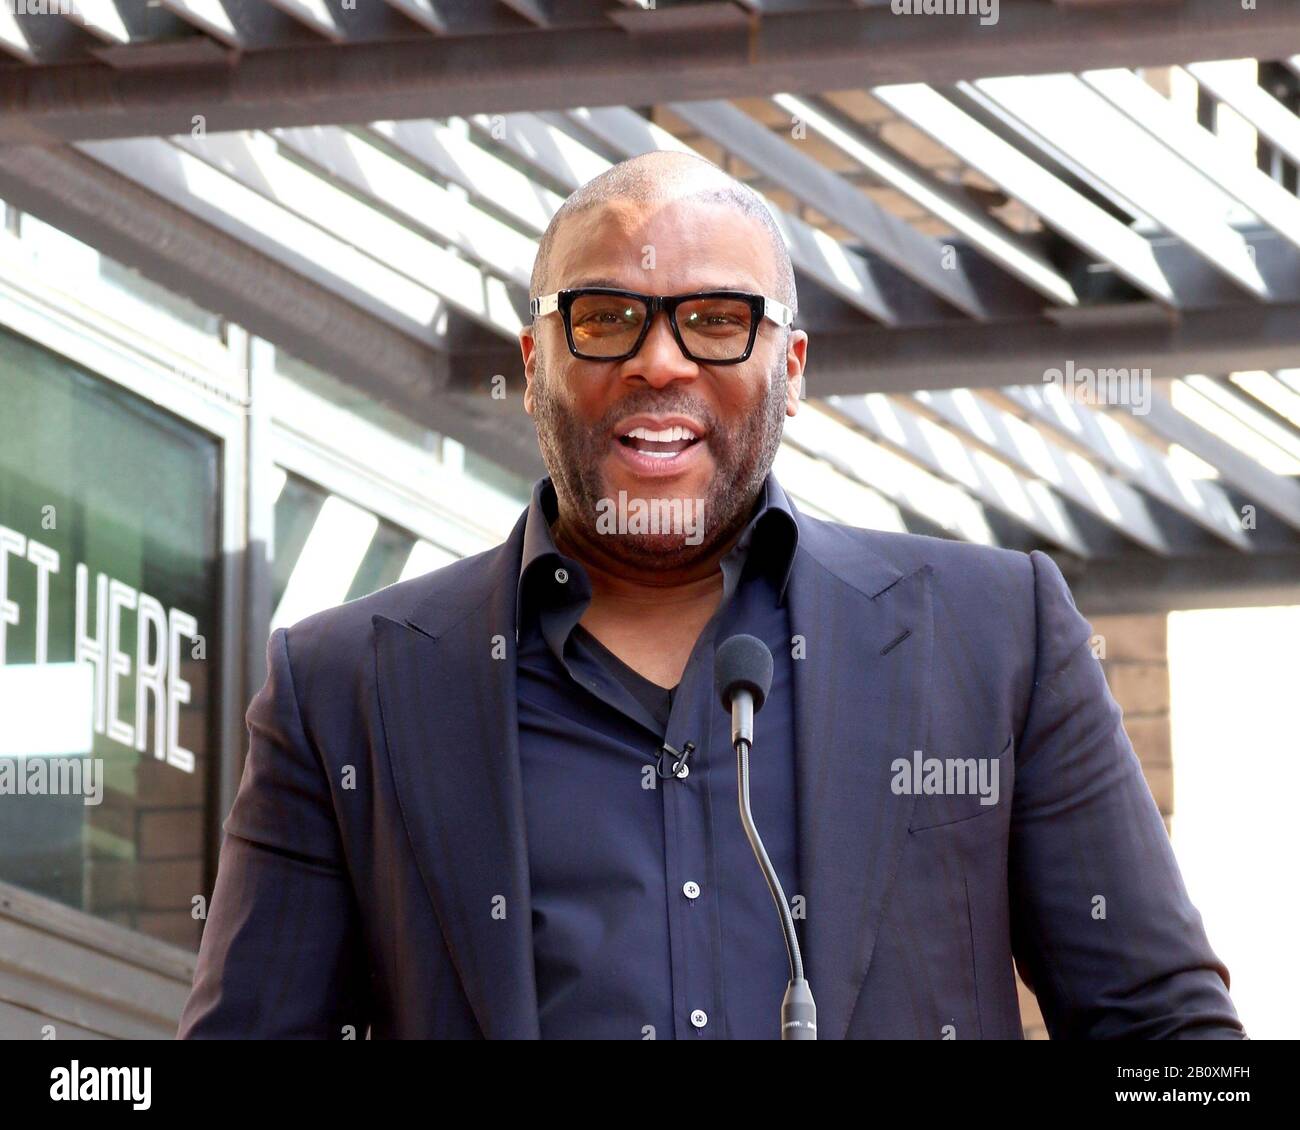 Los Angeles, CA. 21st Feb, 2020. Tyler Perry at the induction ceremony for Star on the Hollywood Walk of Fame for Dr. Phil McGraw, Hollywood Boulevard, Los Angeles, CA February 21, 2020. Credit: Priscilla Grant/Everett Collection/Alamy Live News Stock Photo